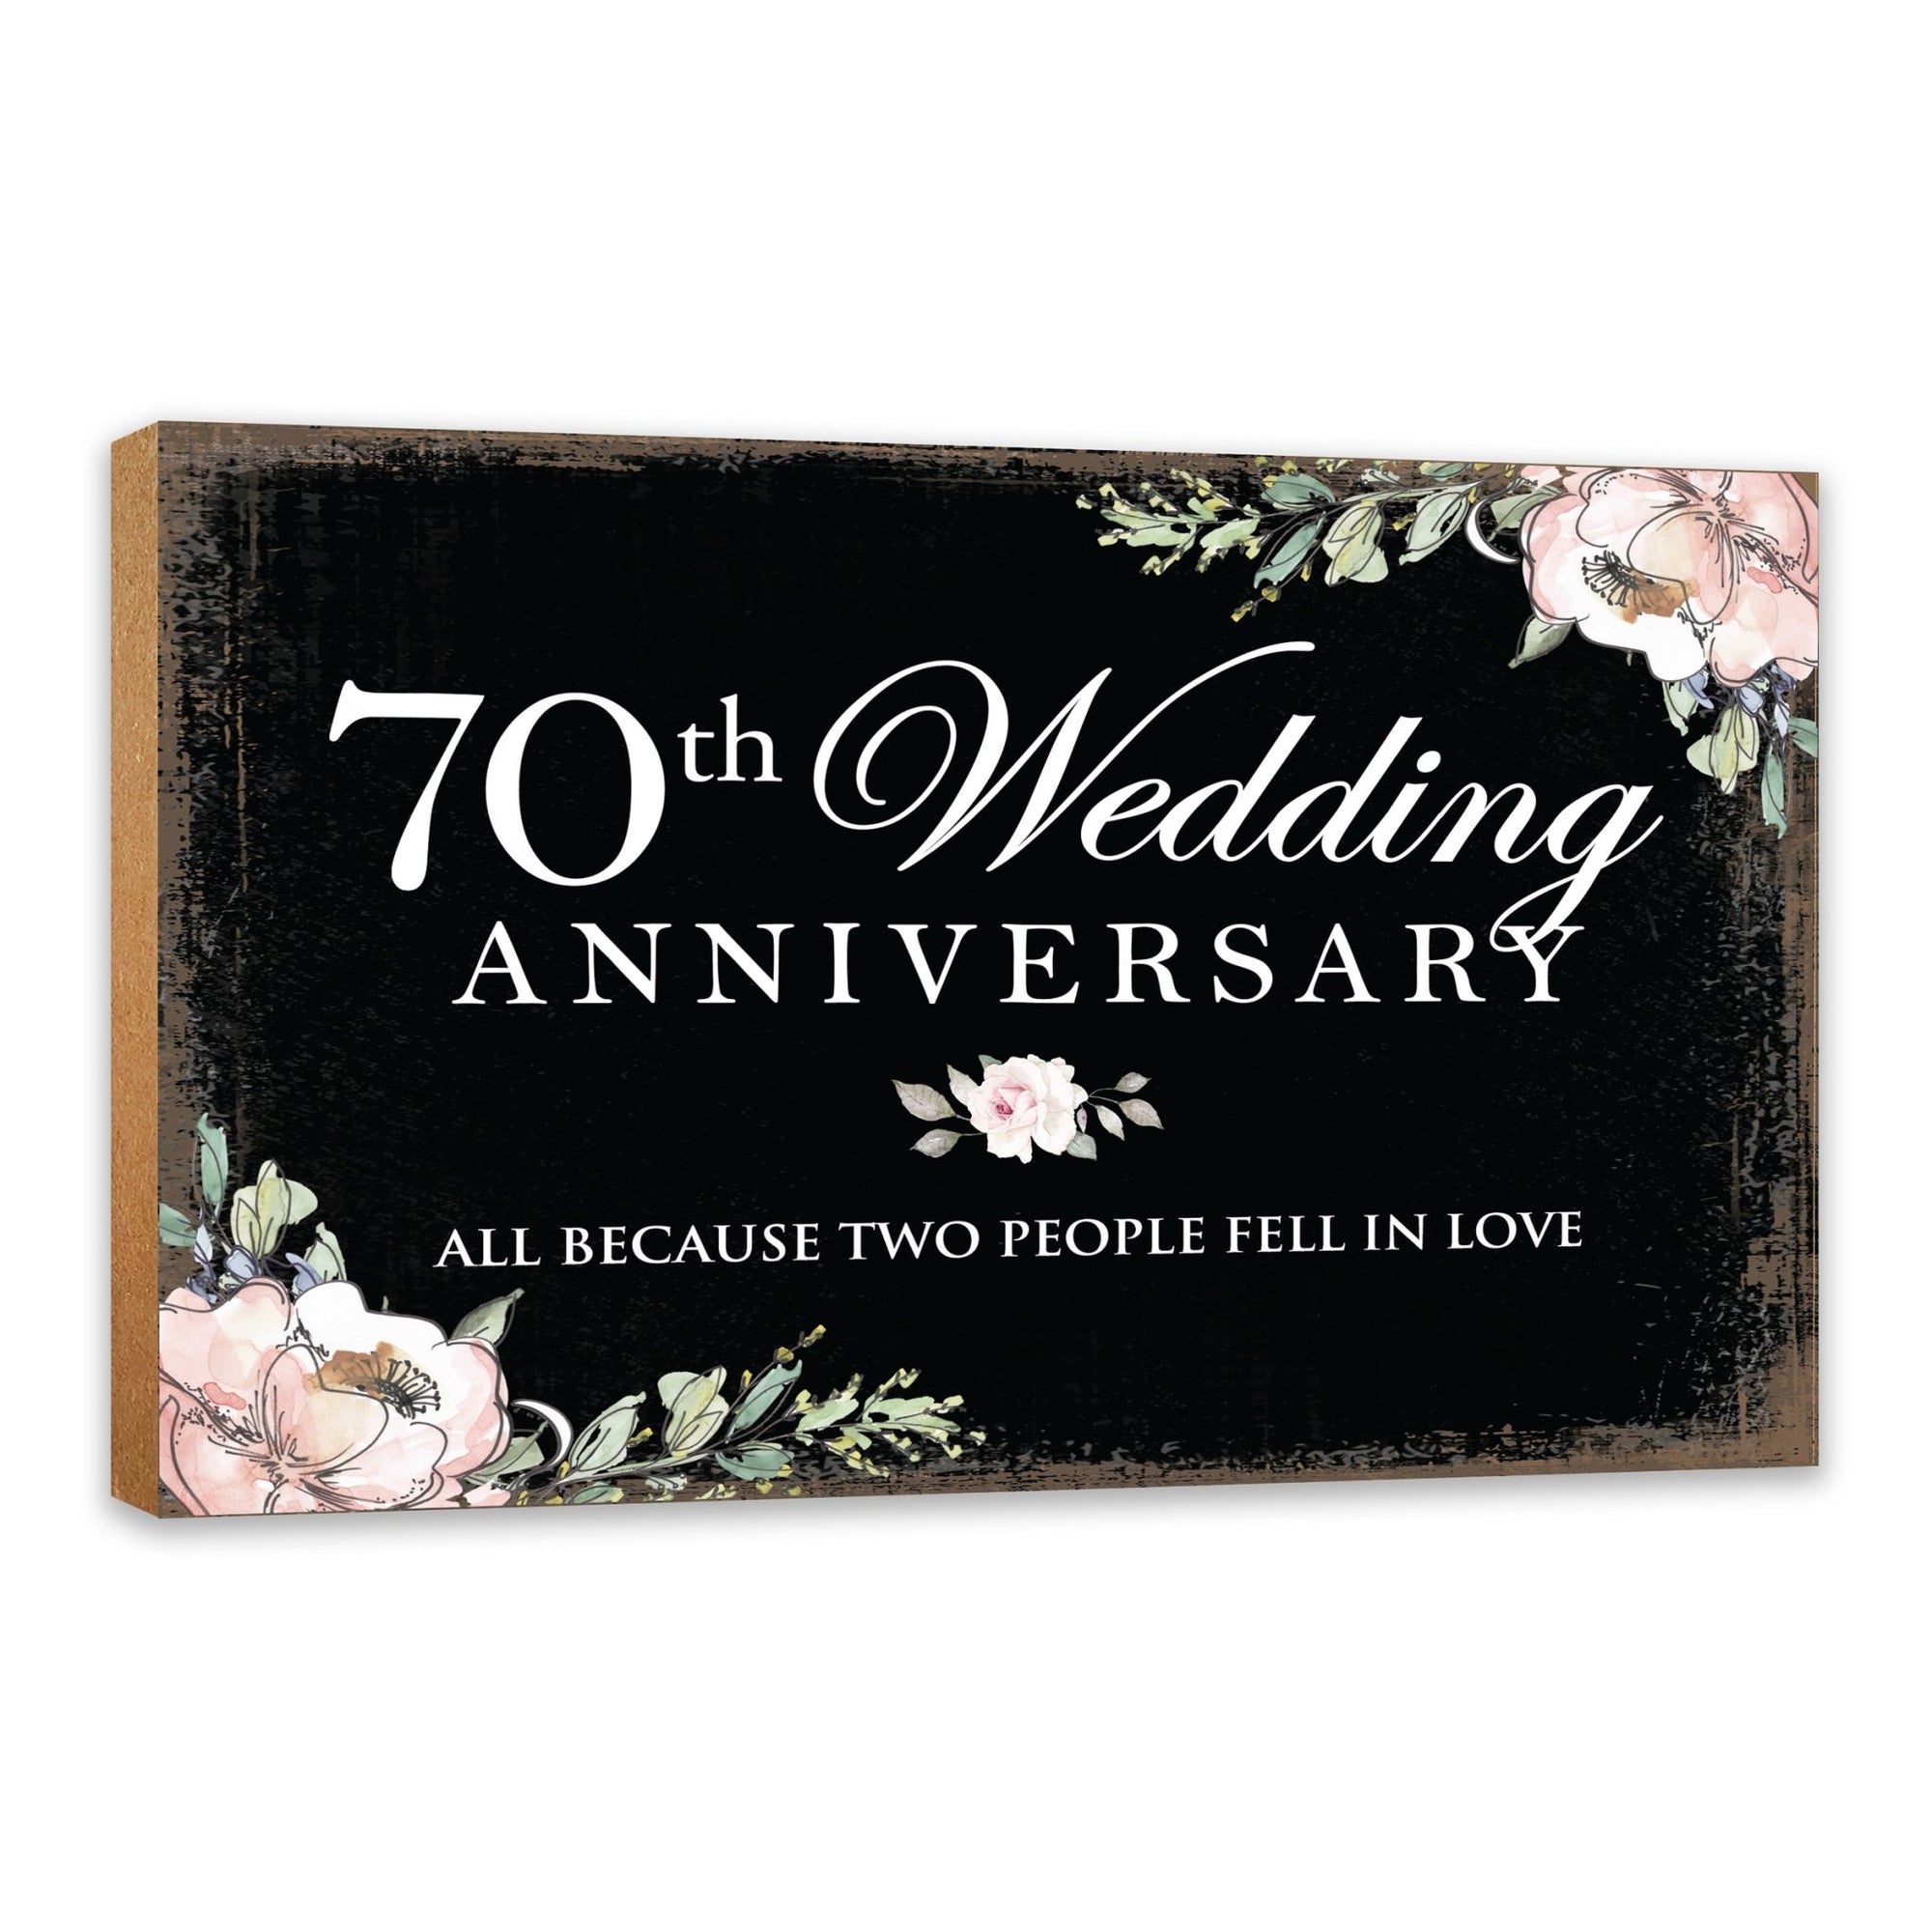 70th Wedding Anniversary Unique Shelf Decor and Tabletop Signs Gift for Couples - Fell In Love - LifeSong Milestones